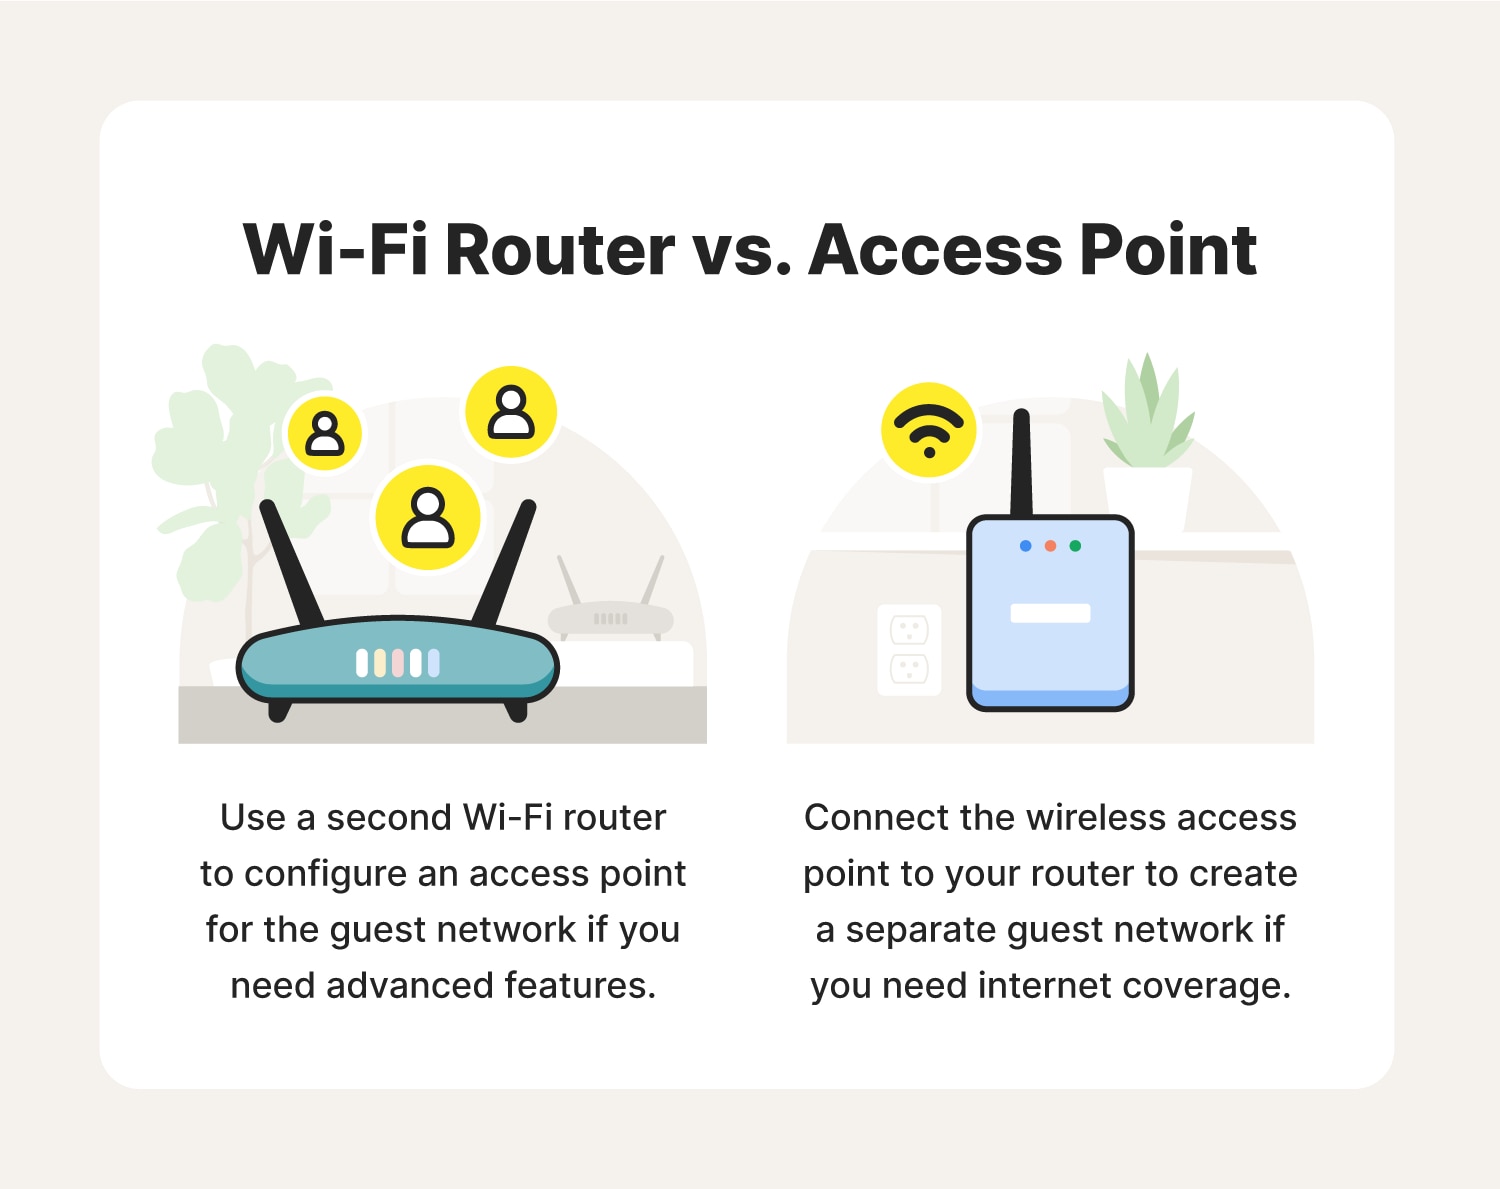 An image illustrating the differences between Wi-Fi routers and access points.